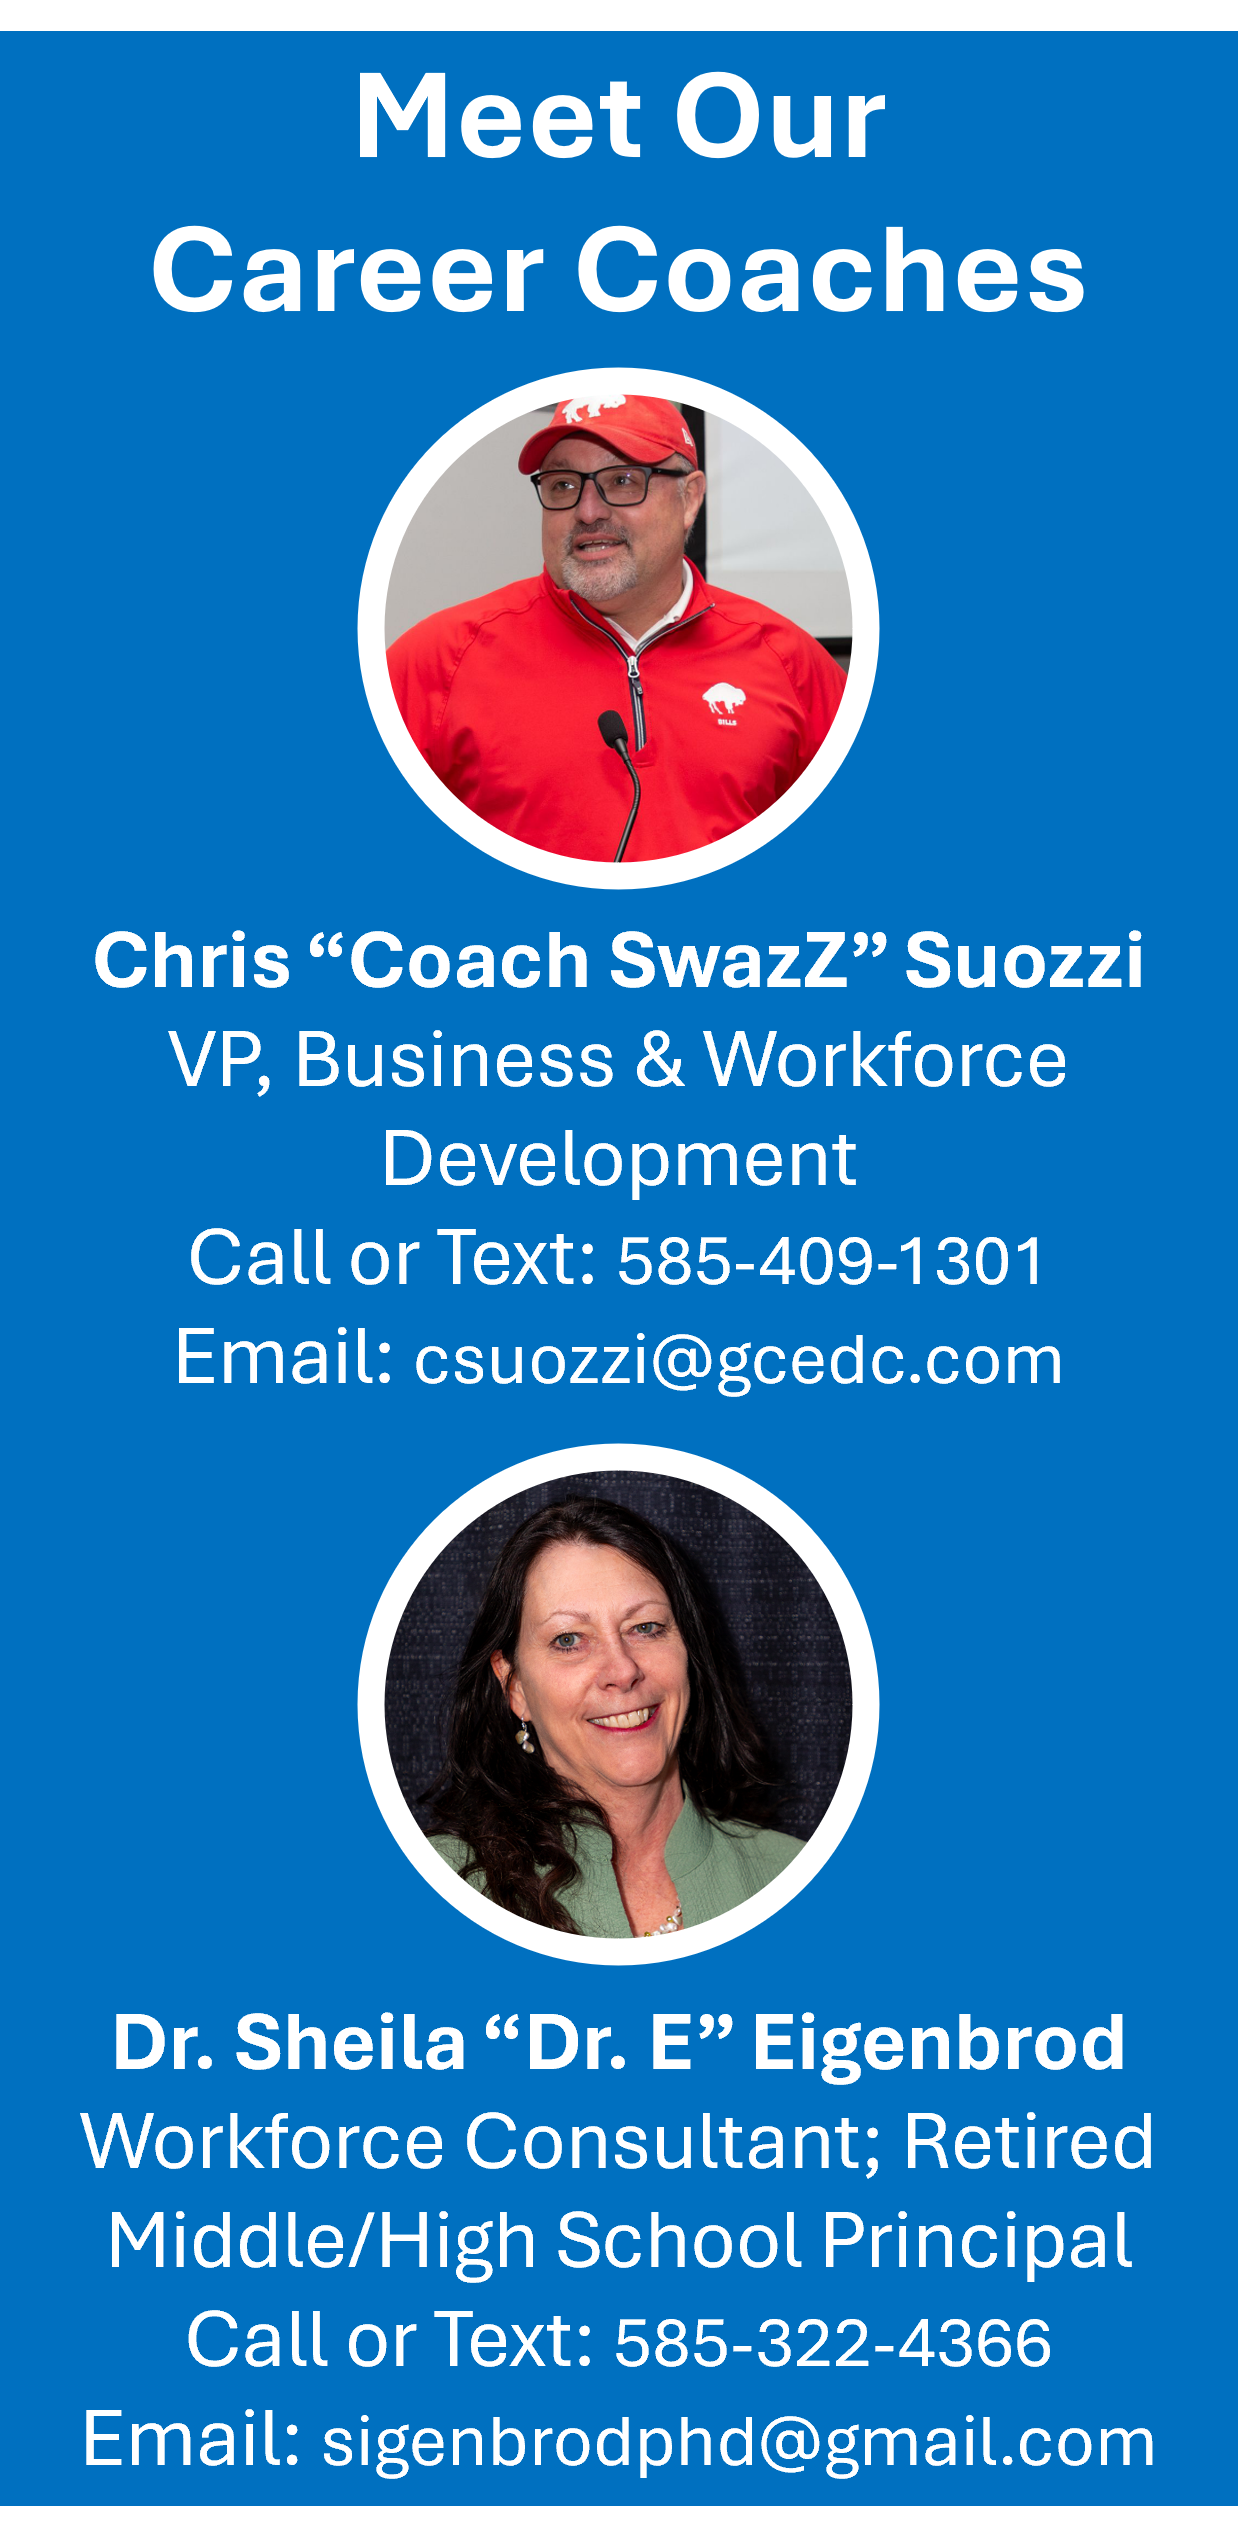 Contact Information for Career Coaches Chris Suozzi and Dr. Sheila Eigenbrod